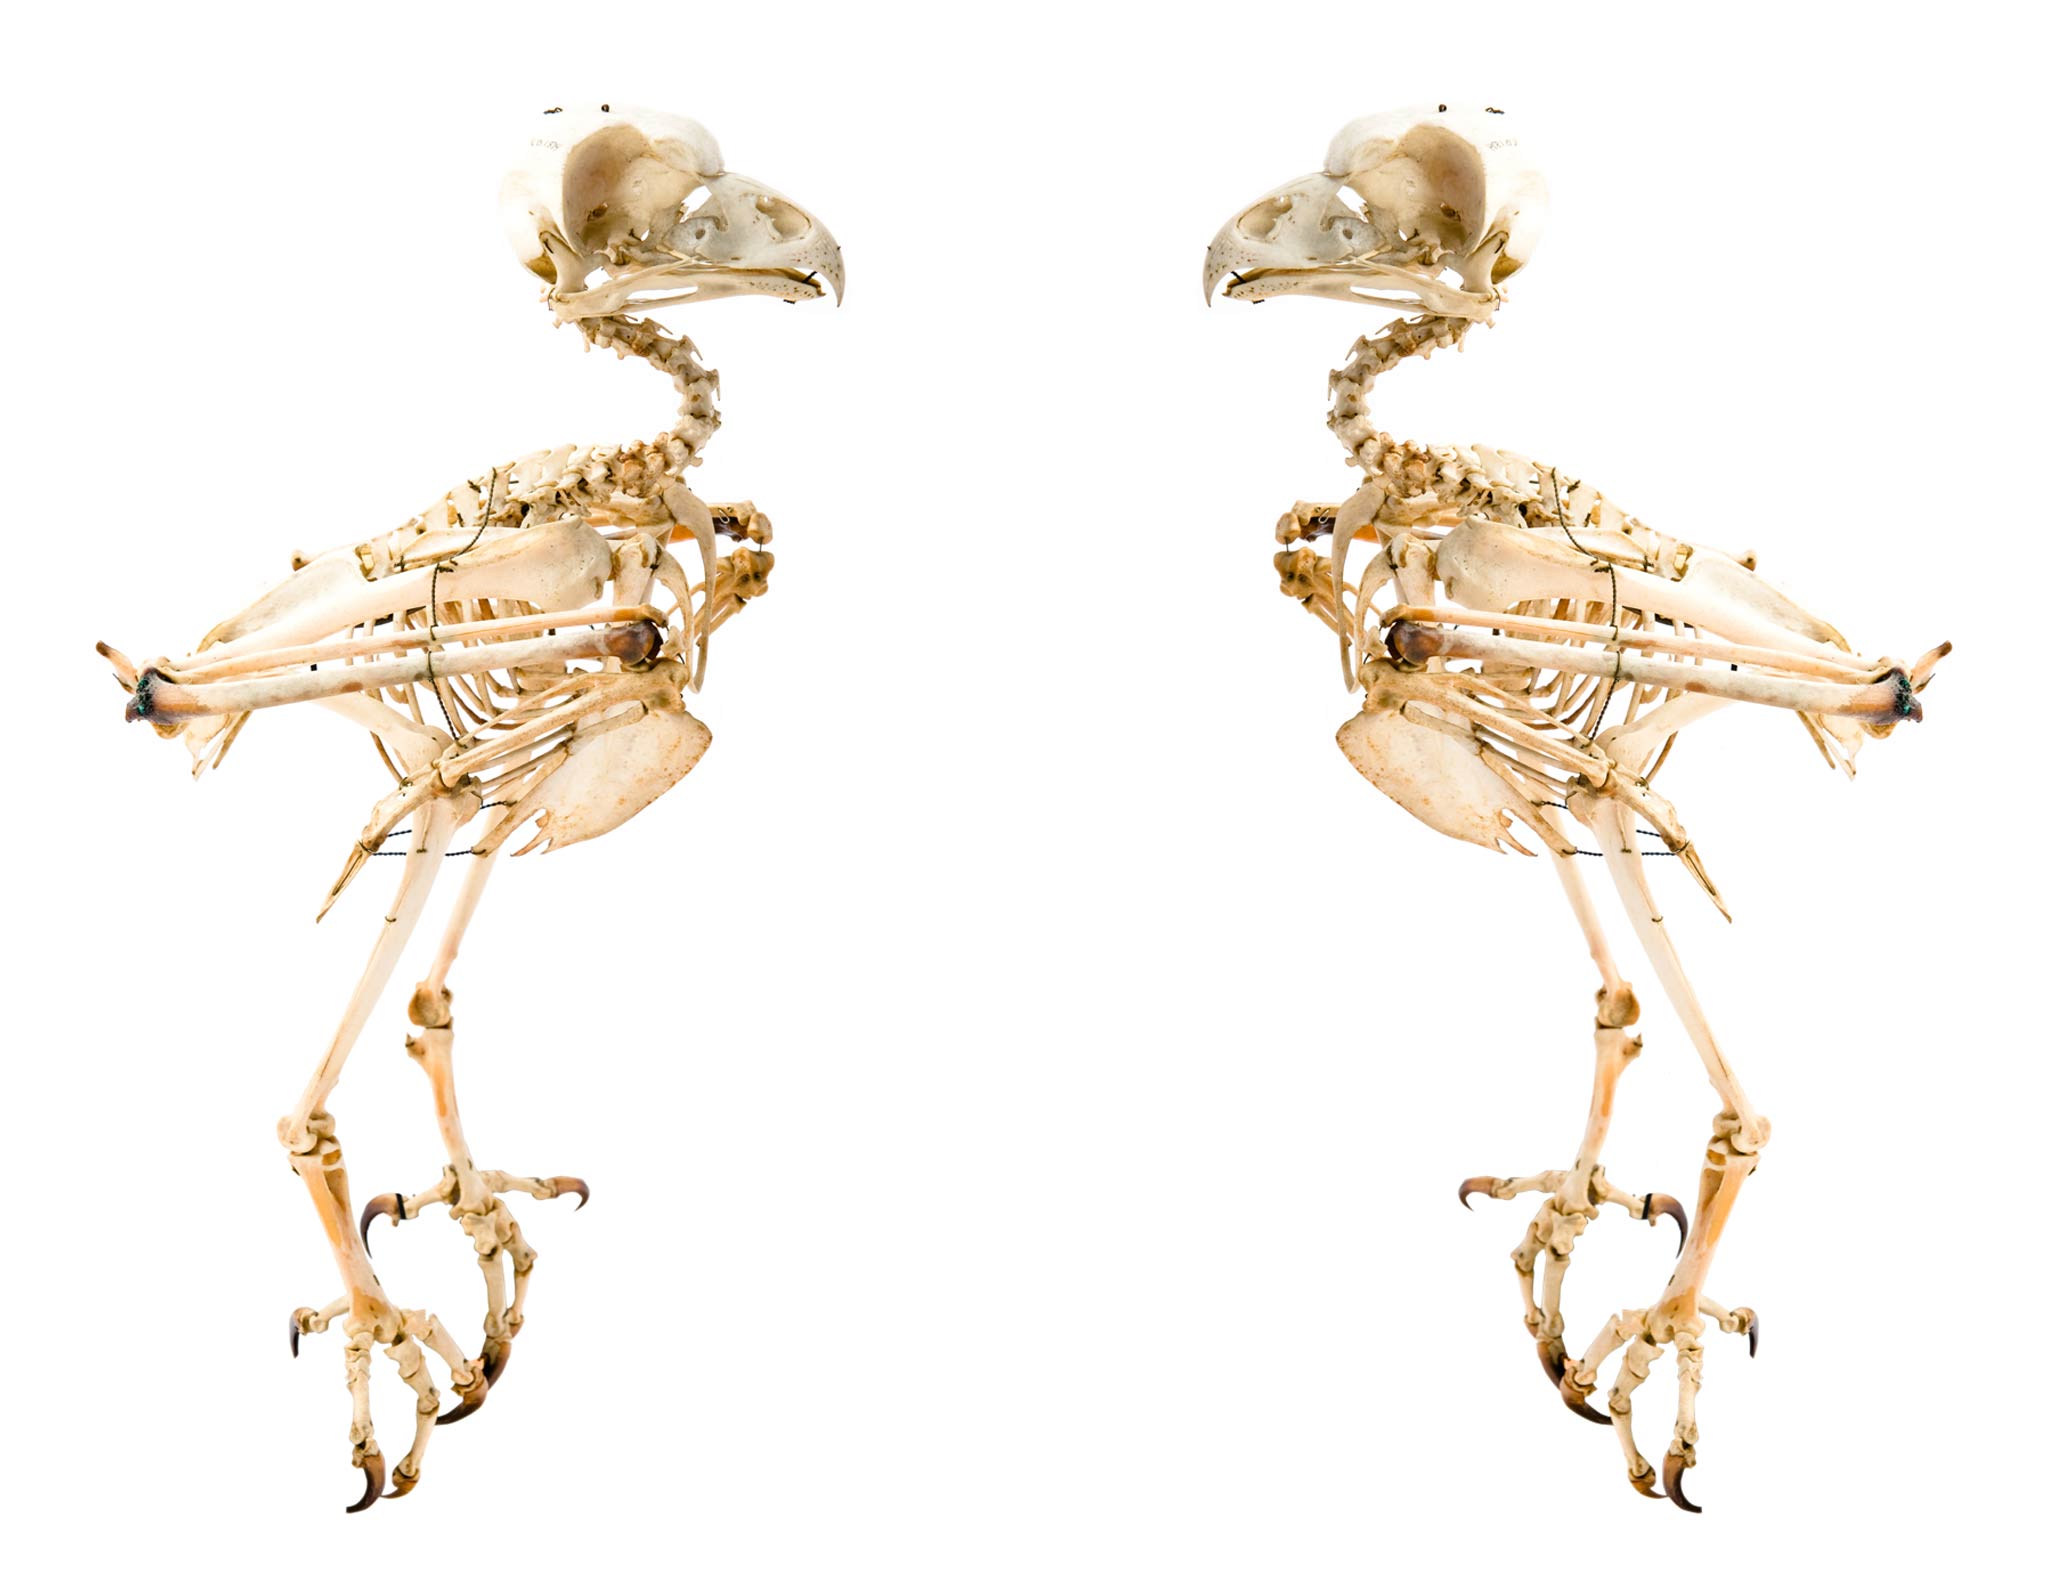 Conversations with a Curator: Natural History Curator Matthew Gibson on Skeletons